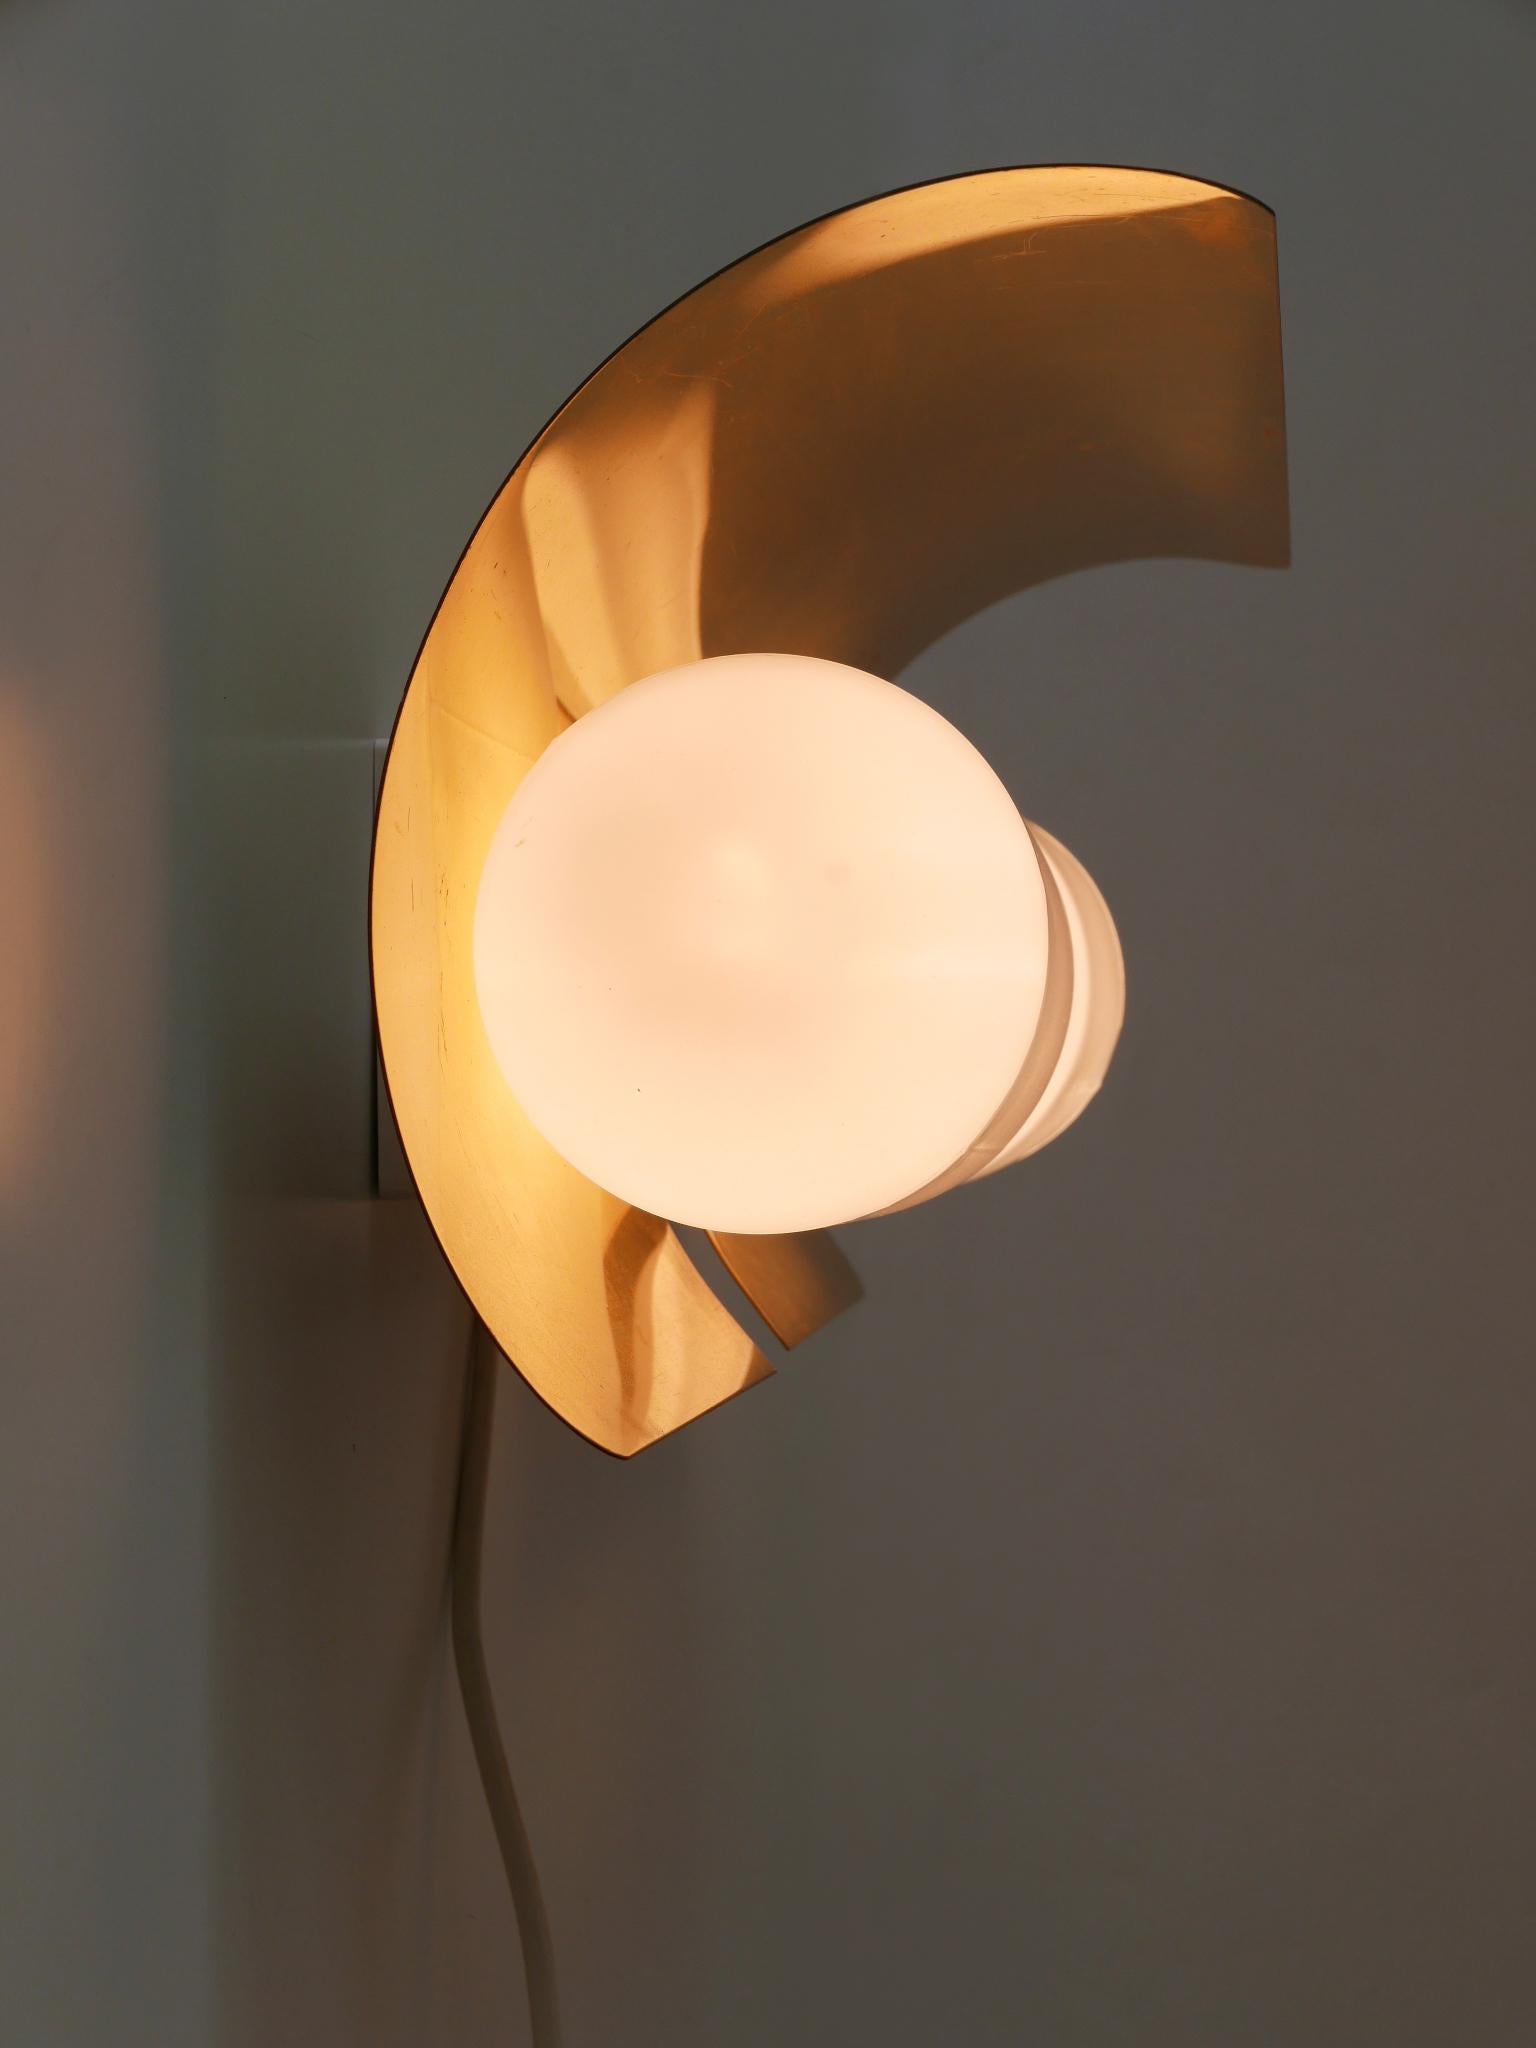 Rare Mid Century Modern Sconce by Hans-Agne Jakobsson for AB Markaryd 1950s For Sale 8